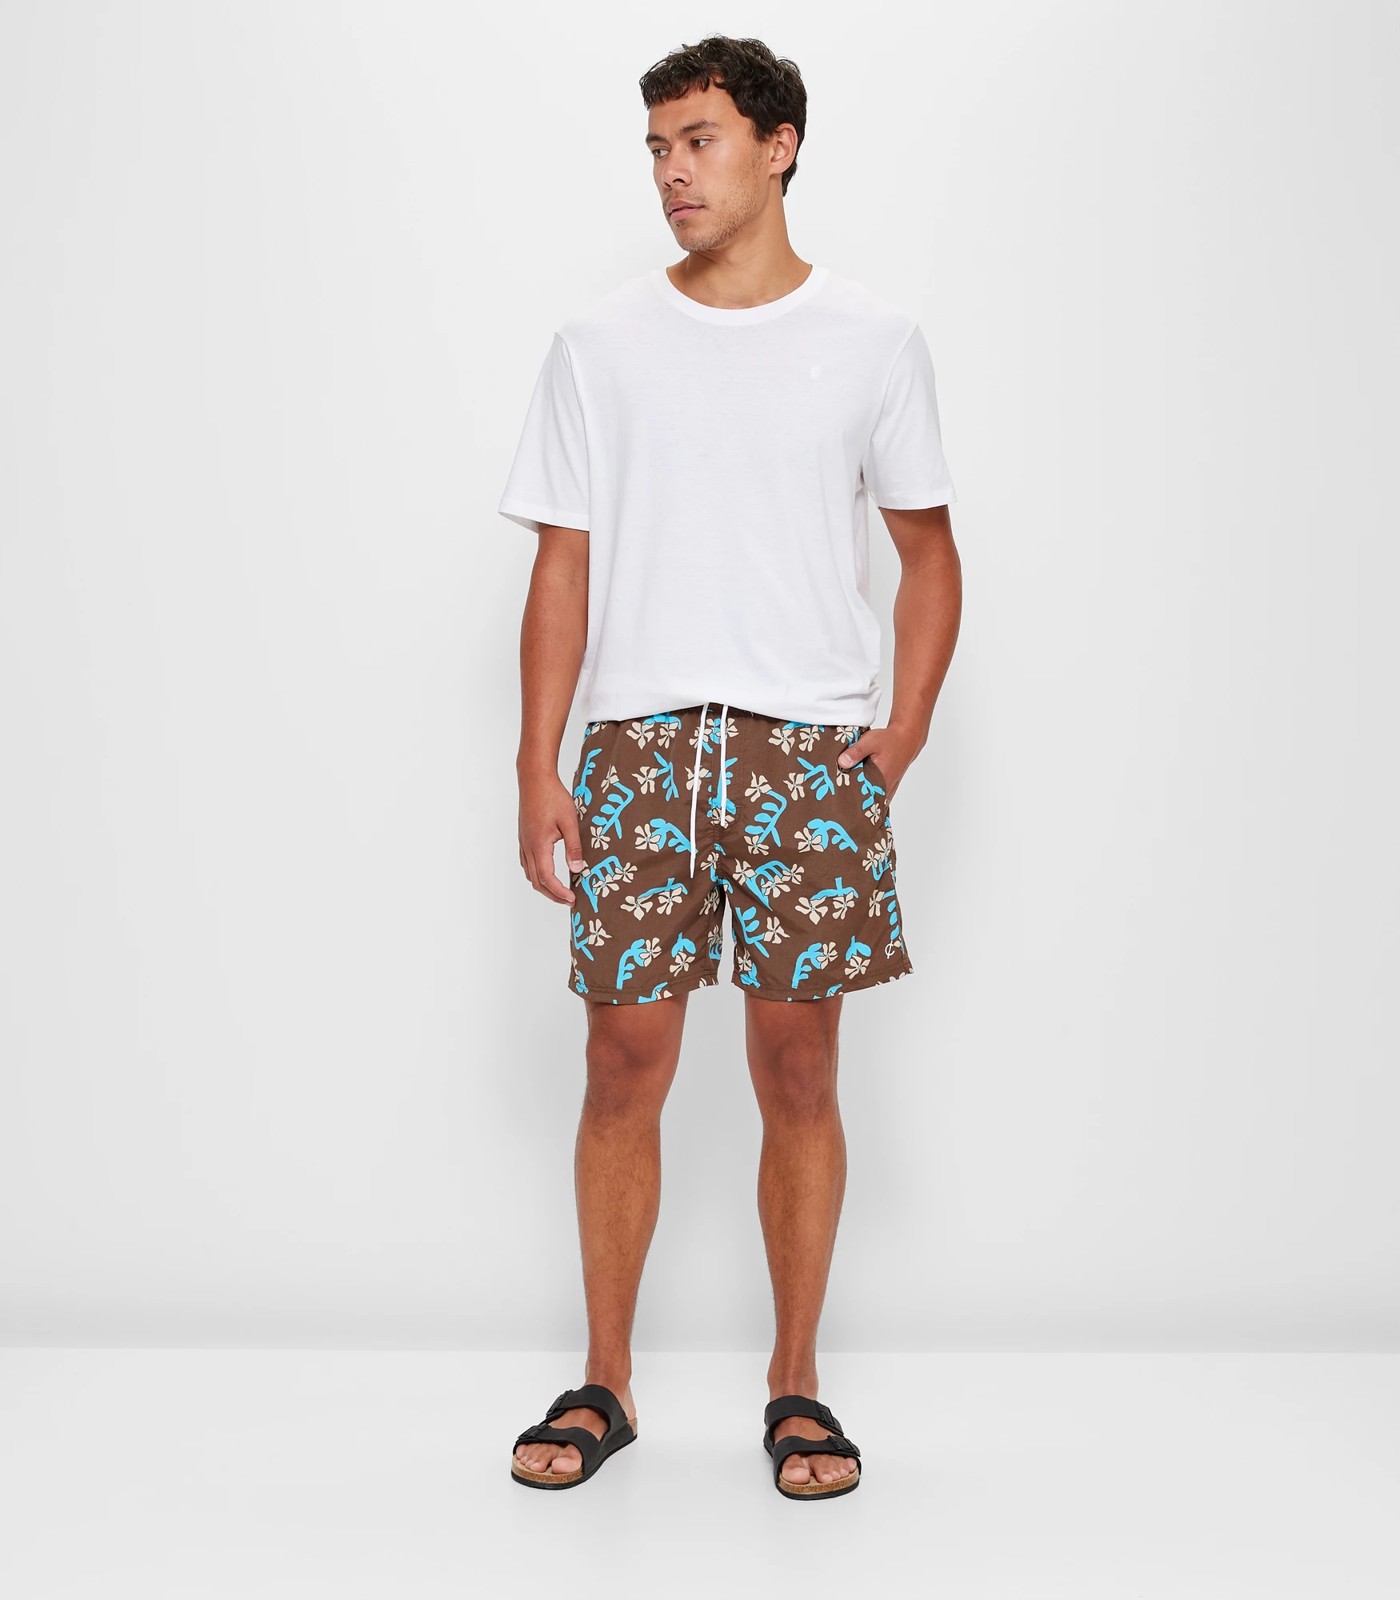 Commons Printed Volley Shorts | Target Australia